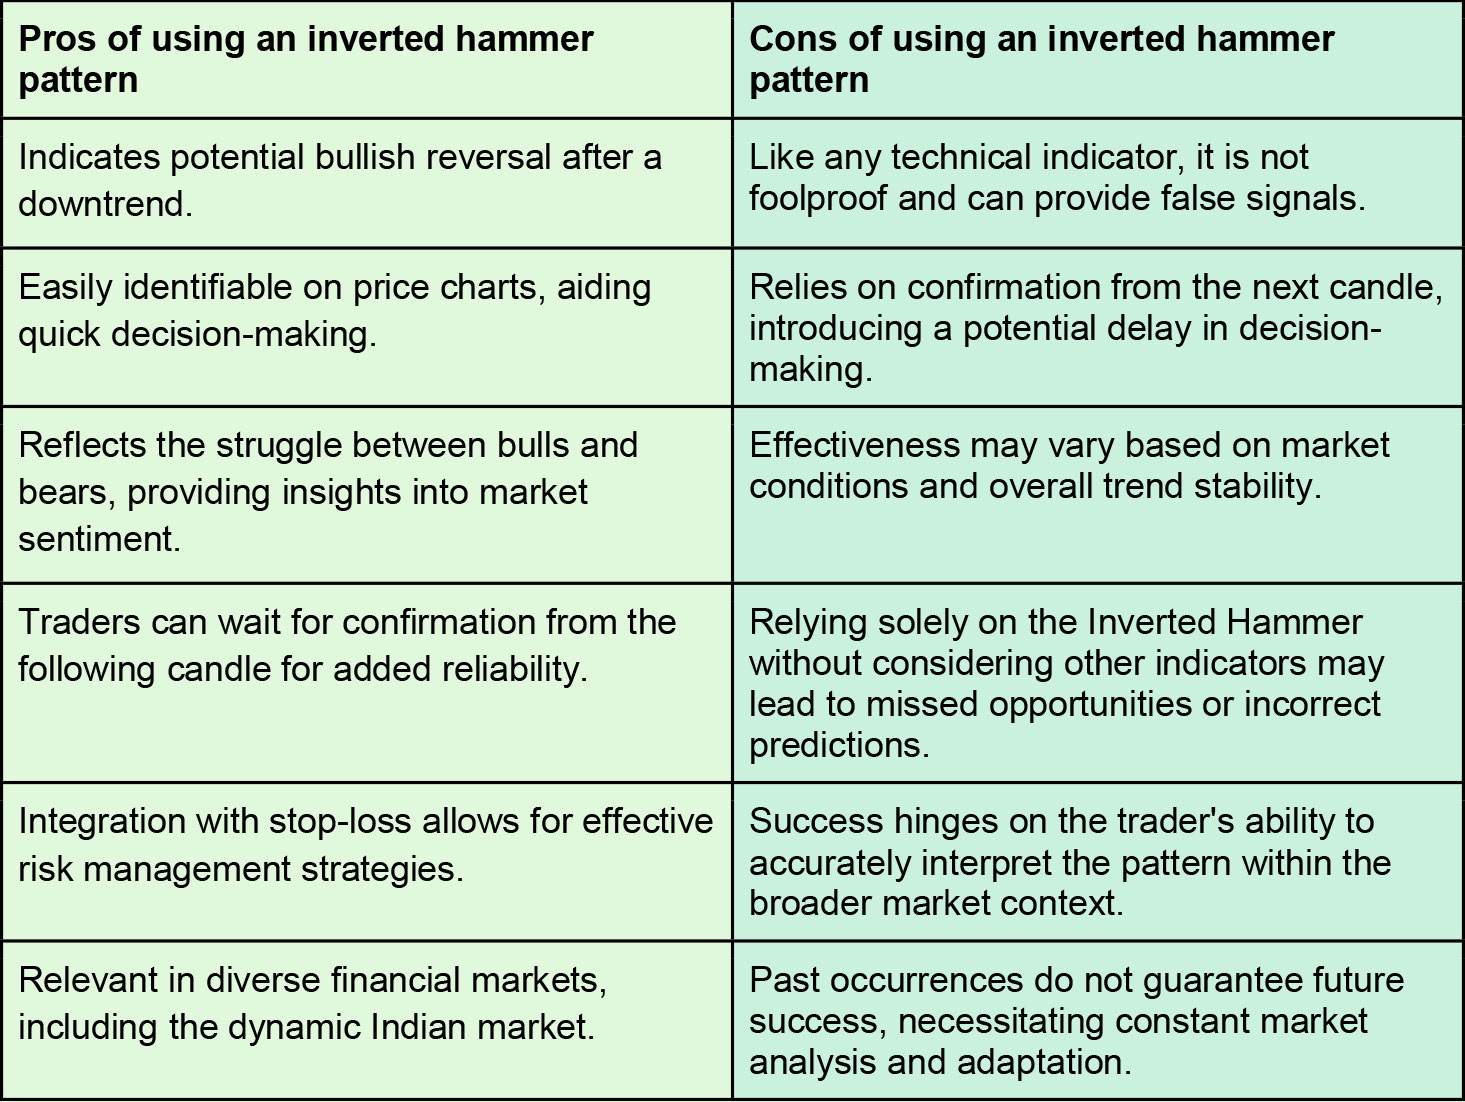 Pros and cons of using the Inverted Hammer pattern